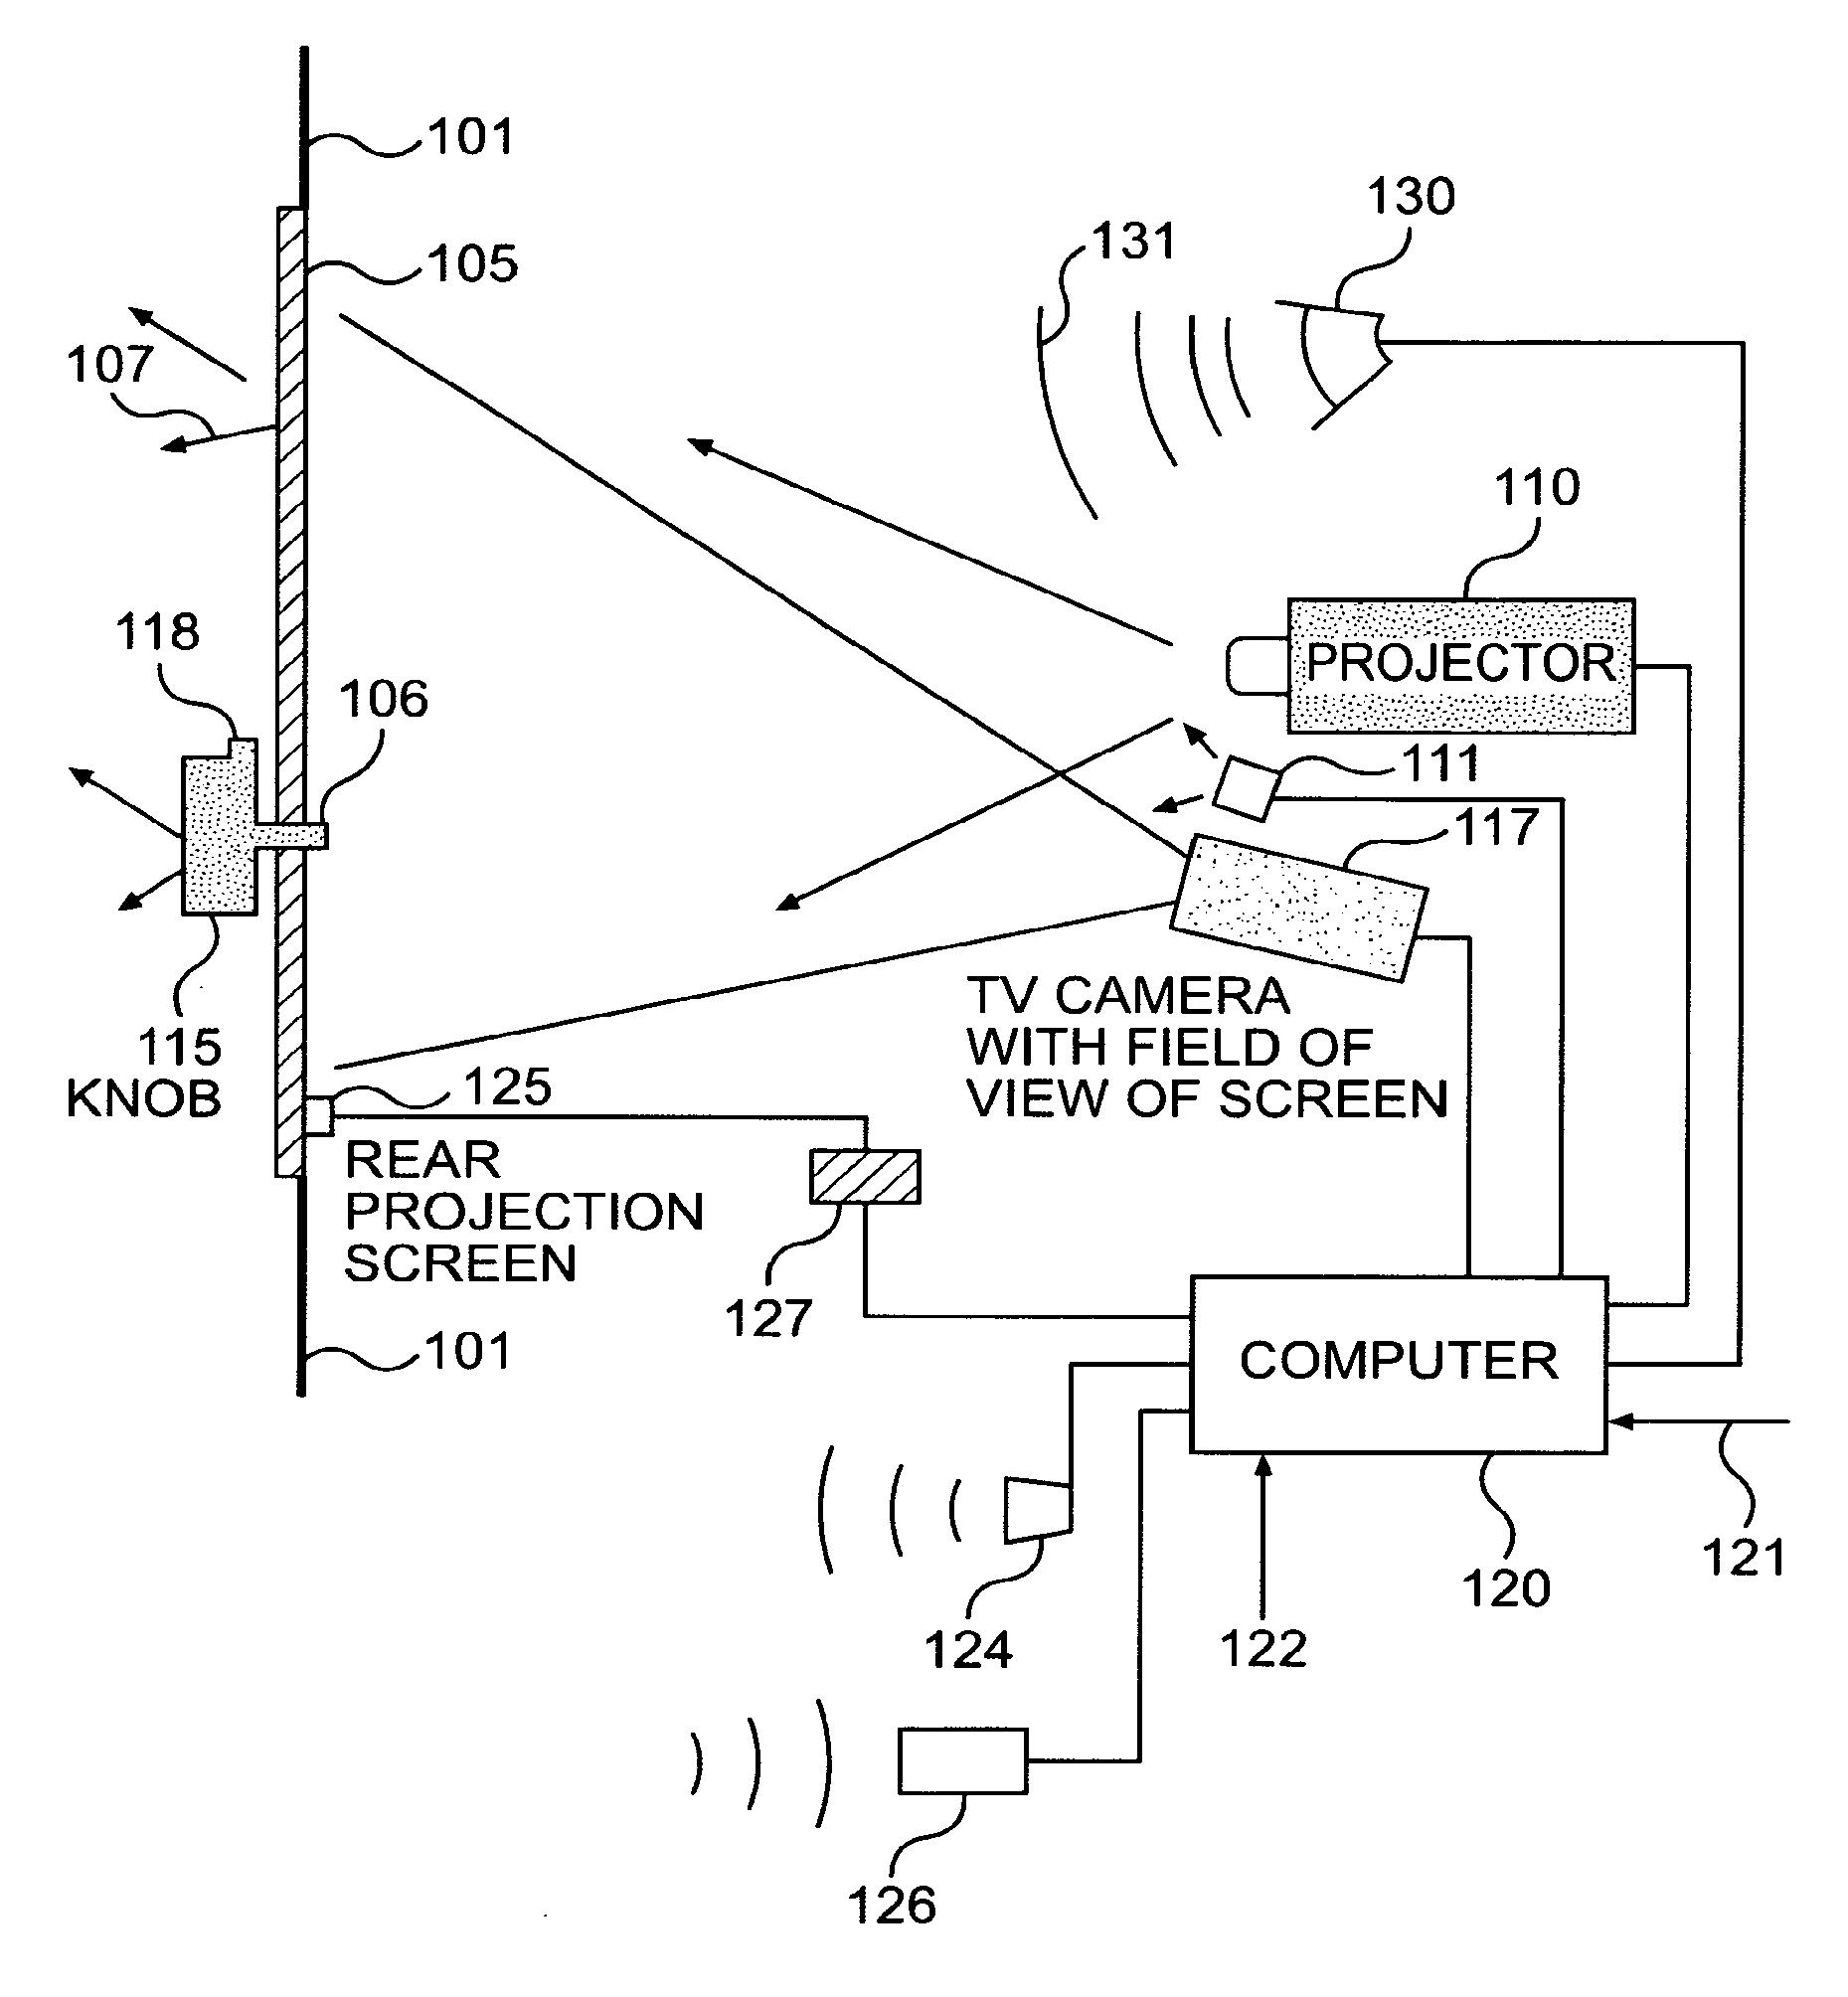 Control systems involving novel physical controls and touch screens